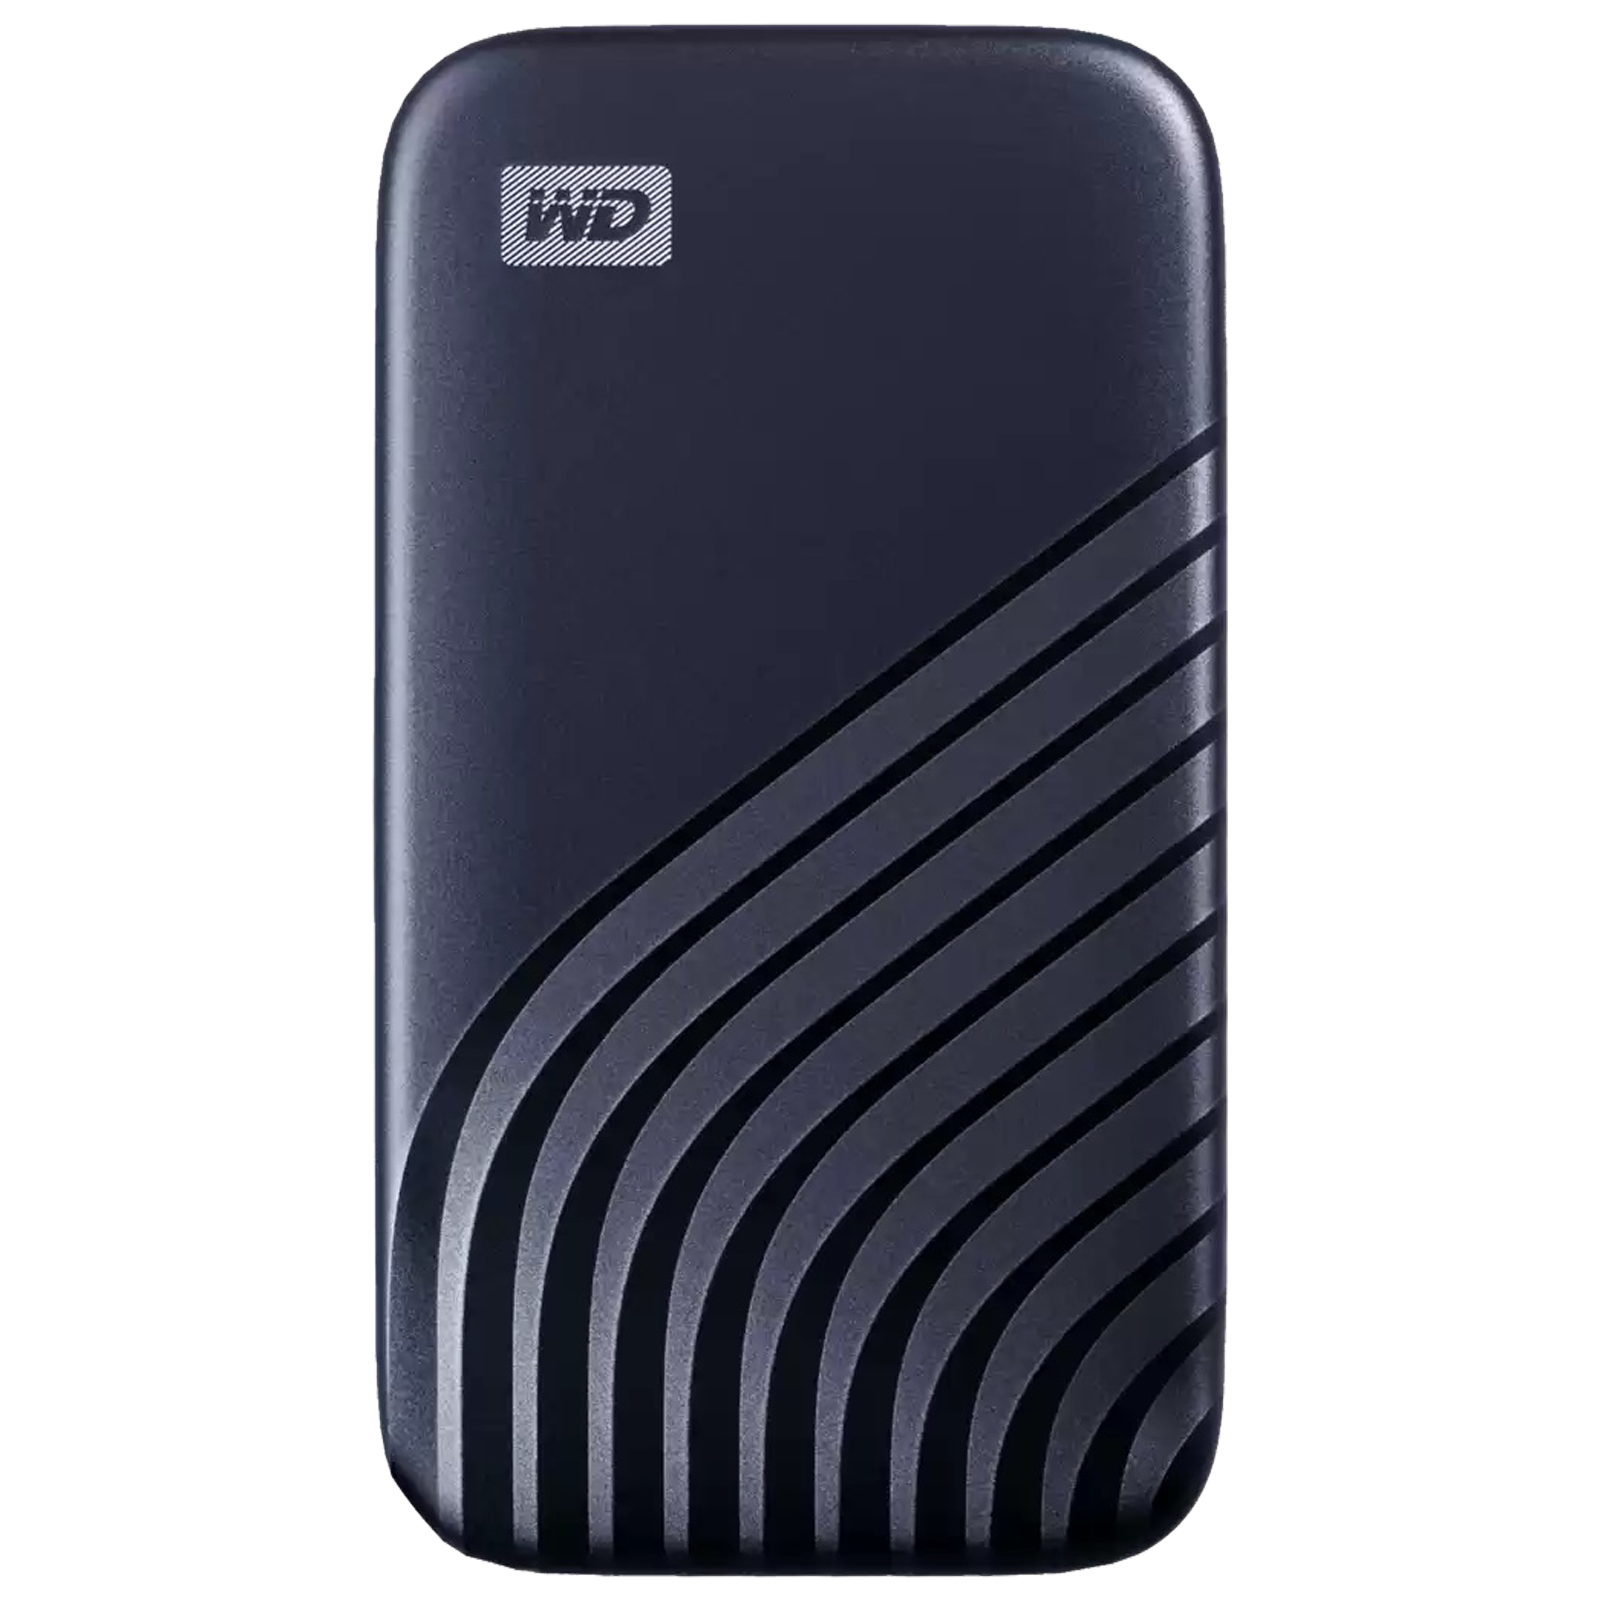 WD - Western Digital My Passport 500GB USB 3.2 (Type-C) Solid State Drive (Password Protection, WDBAGF5000ABL-WESN, Blue)